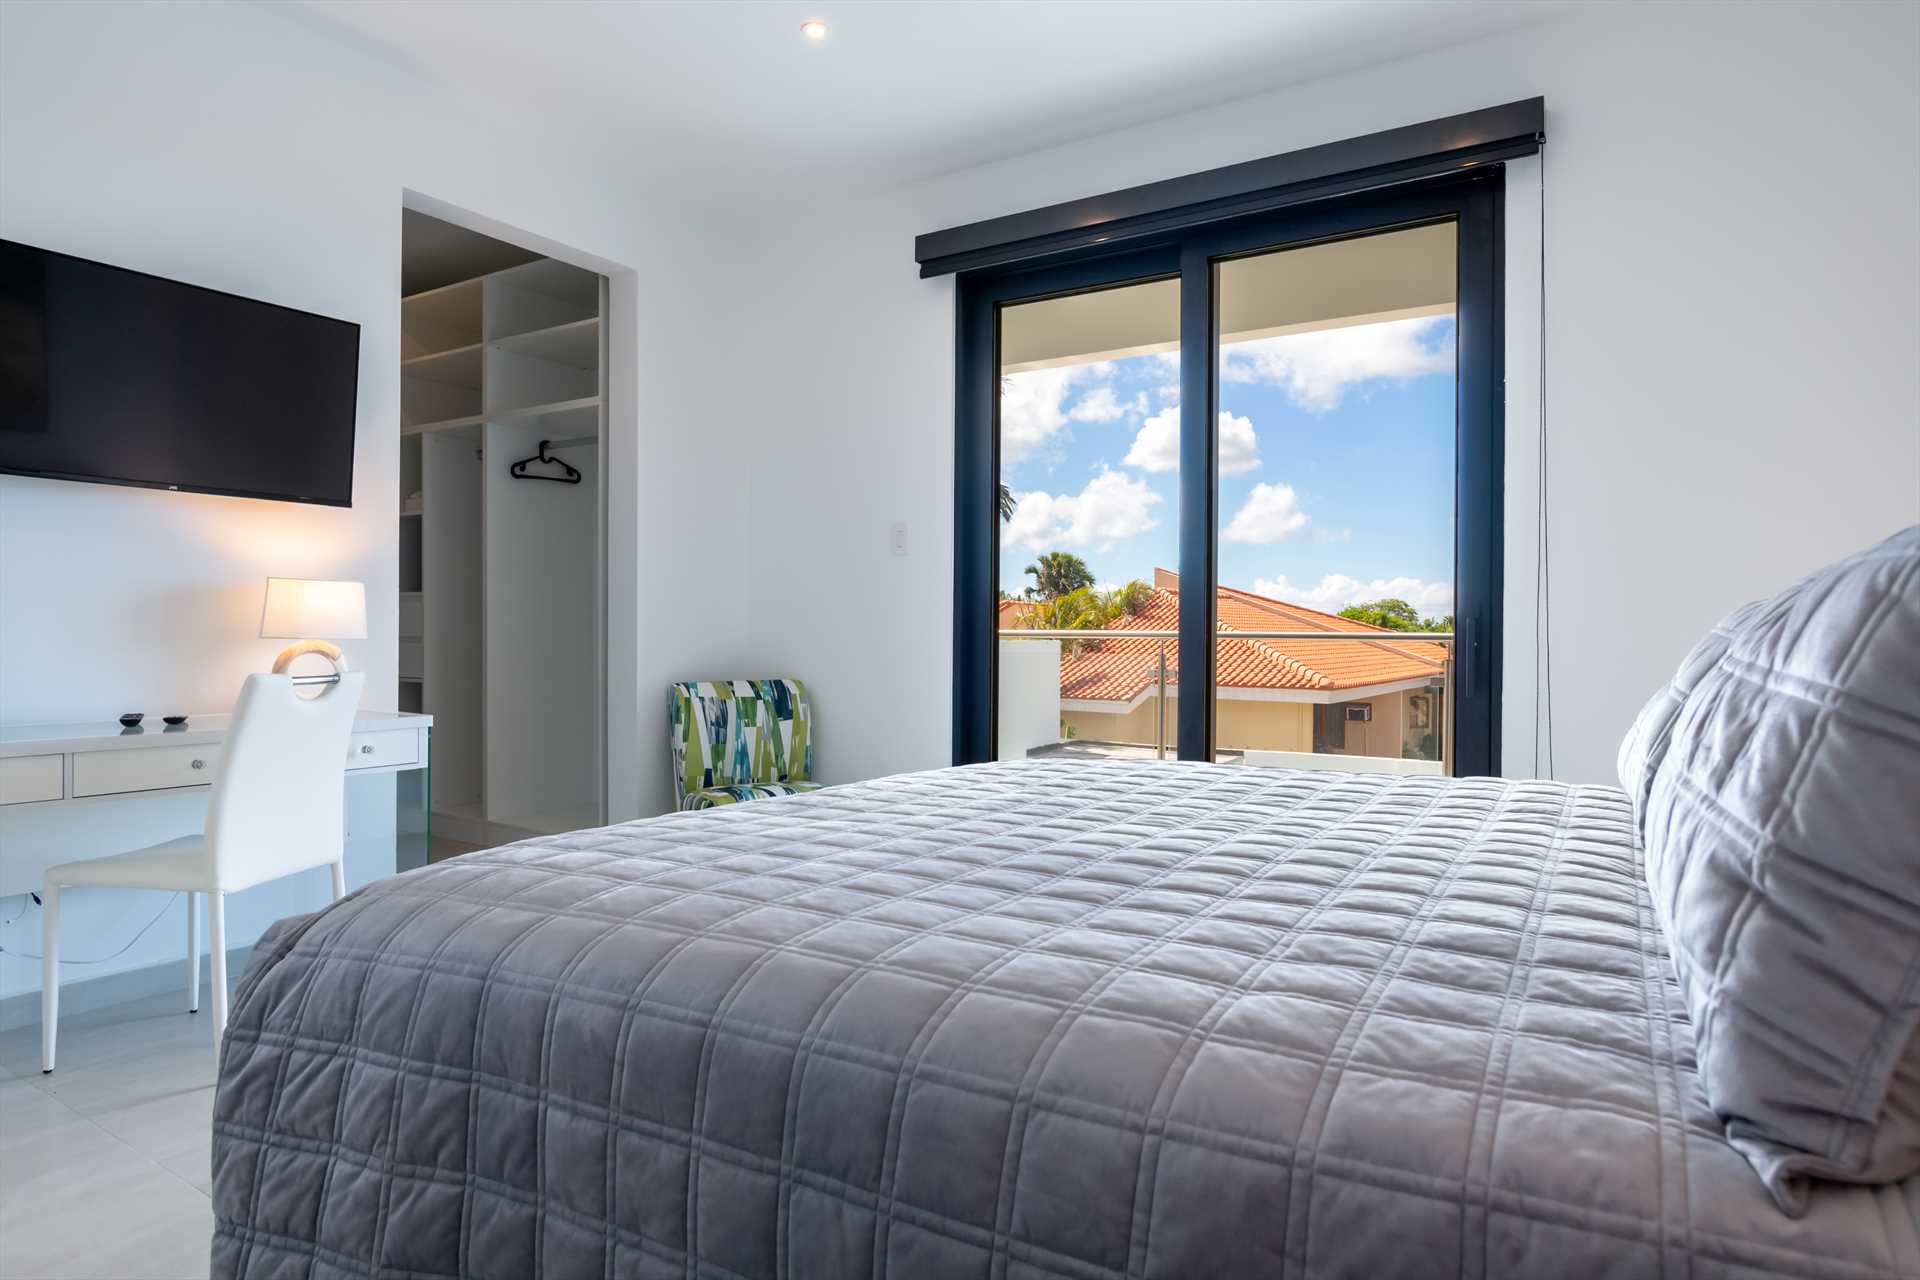 Wake up to breathtaking views from the master bedroom balcony